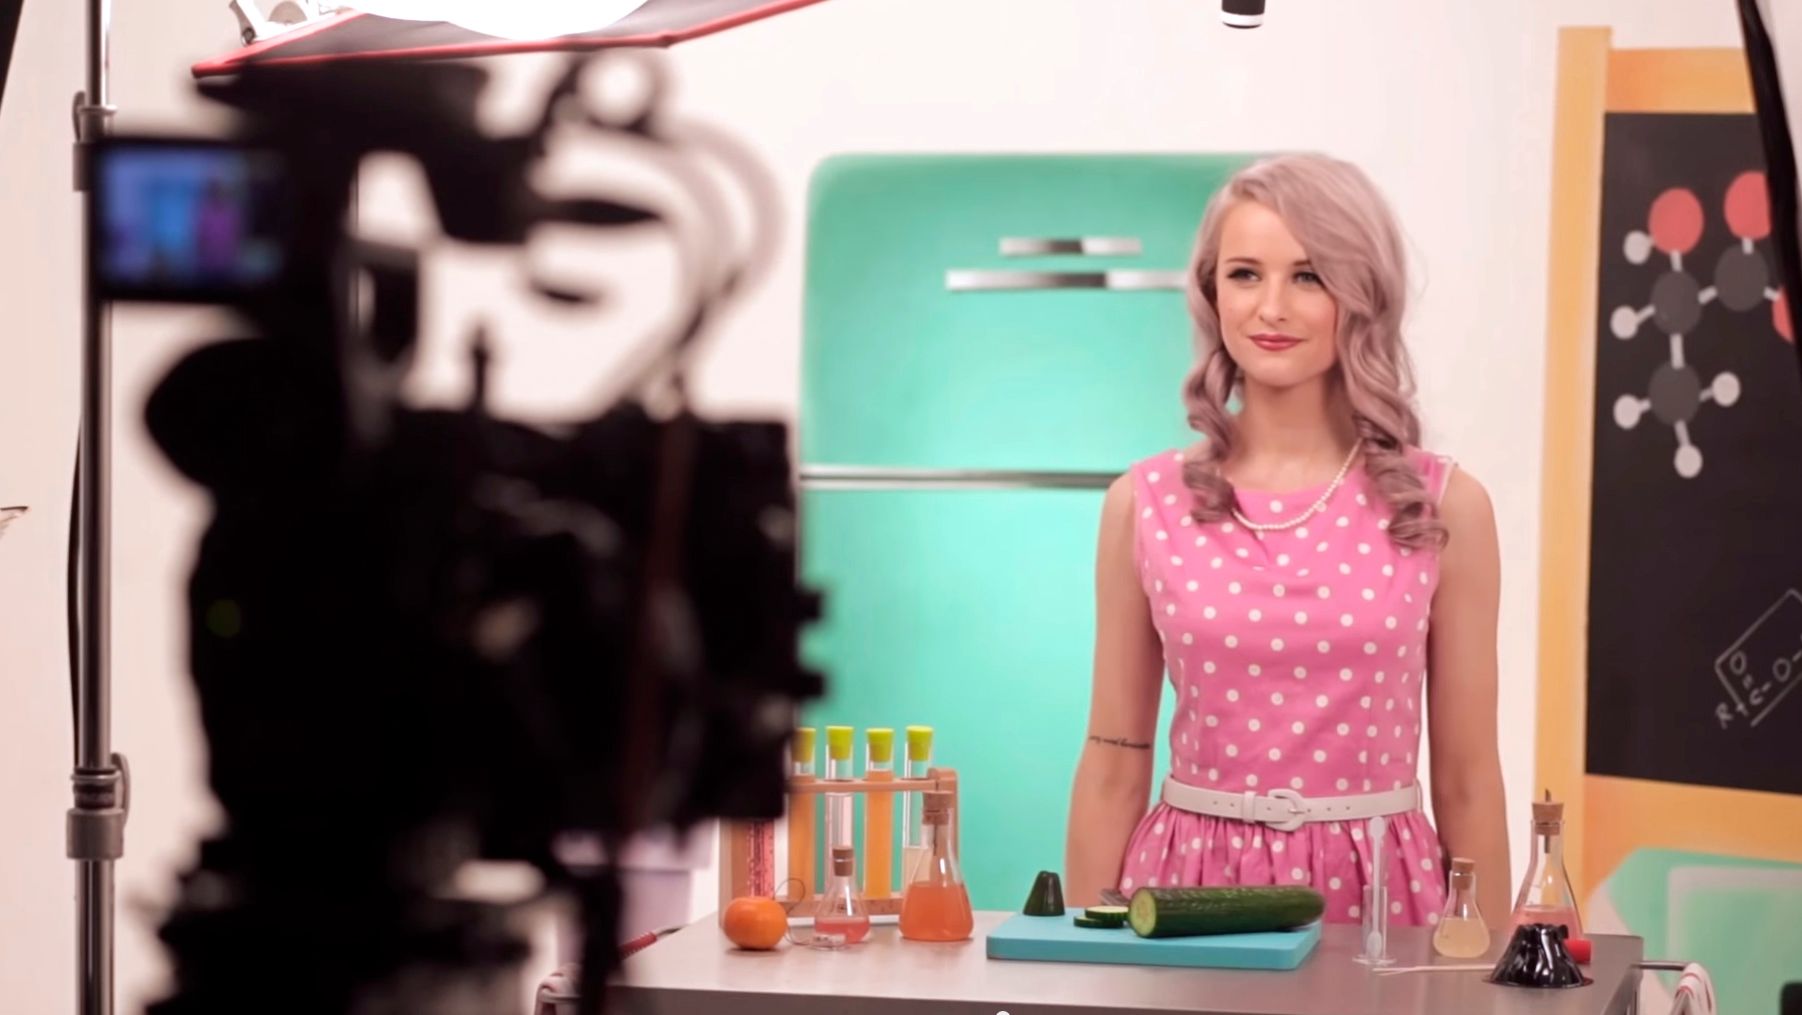 Infomercial for Benefit Cosmetics featuring YouTube blogger Victoria Magrath. Dress by Lindy Bop.